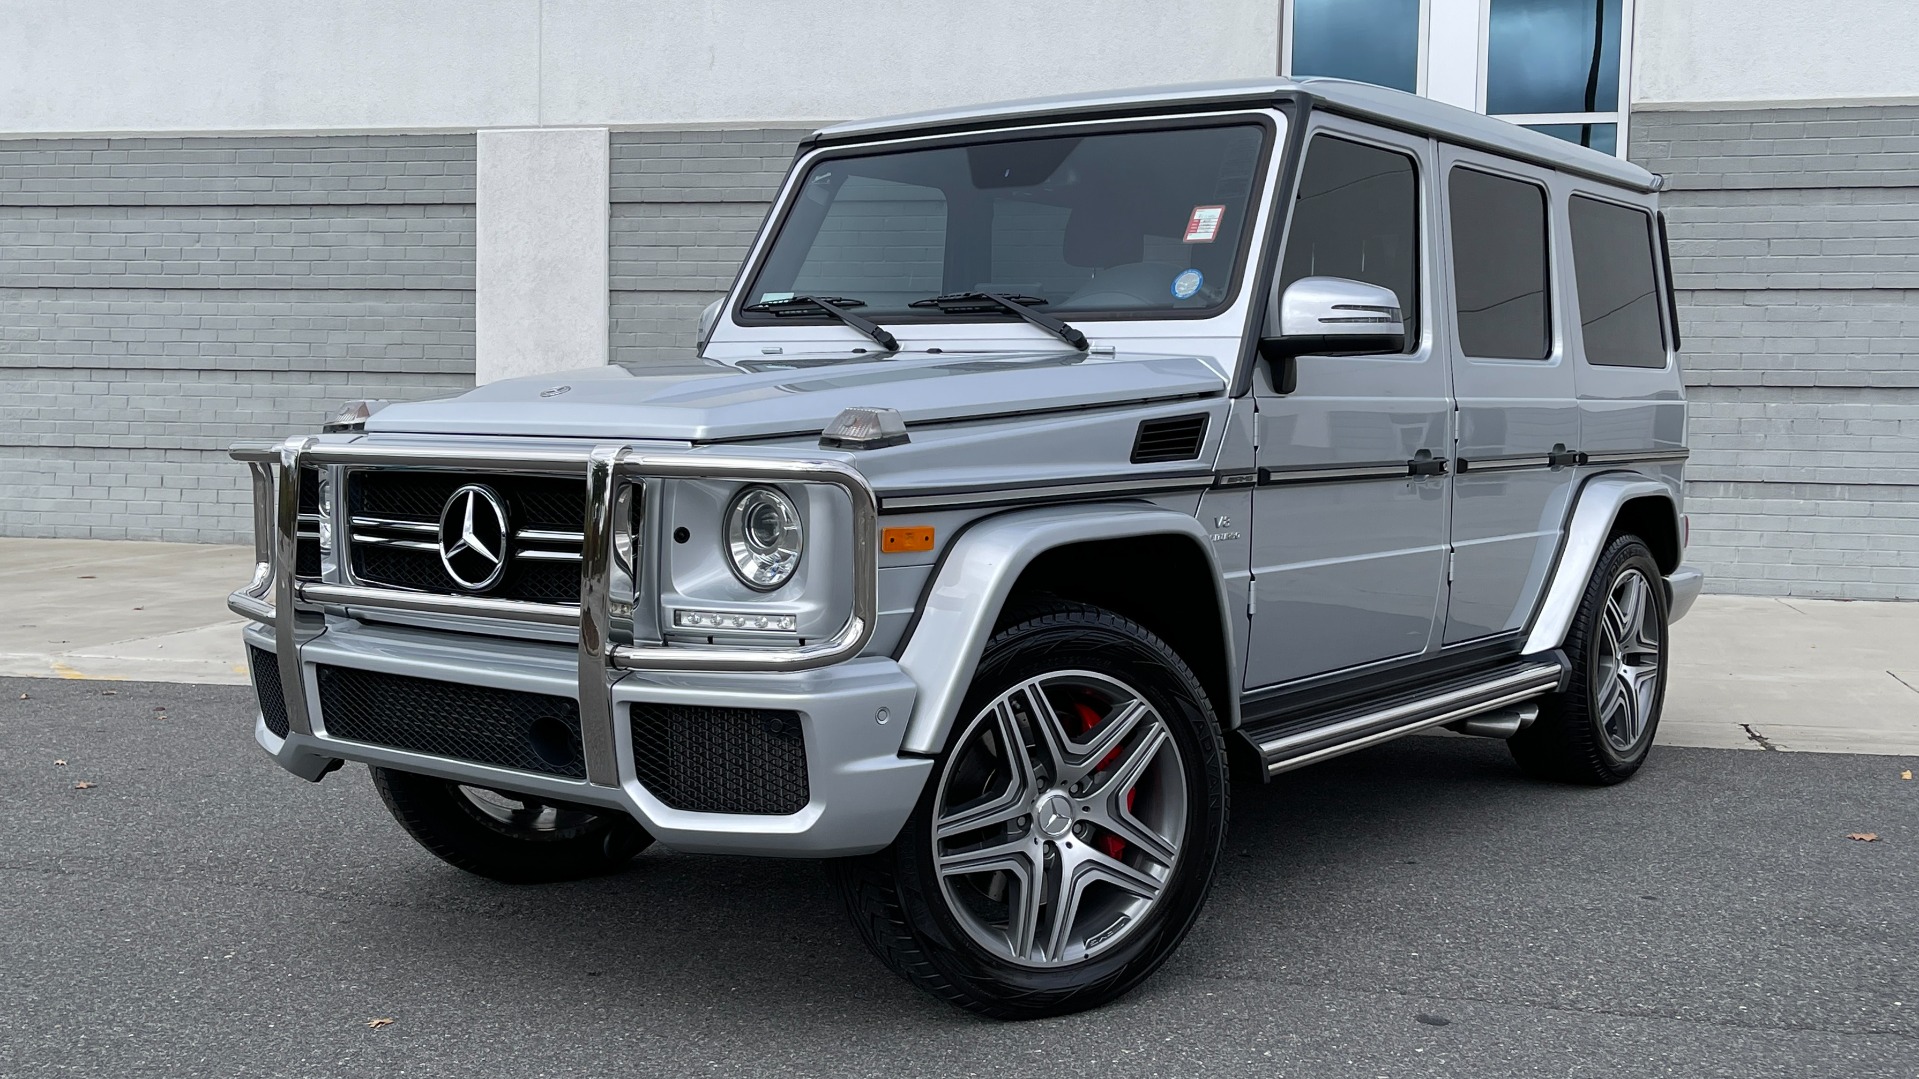 Used 2018 Mercedes-Benz G-CLASS AMG G 63 4MATIC / AMG CF TRIM / DESIGNO / NAV / SUNROOF / REARVIEW for sale Sold at Formula Imports in Charlotte NC 28227 1